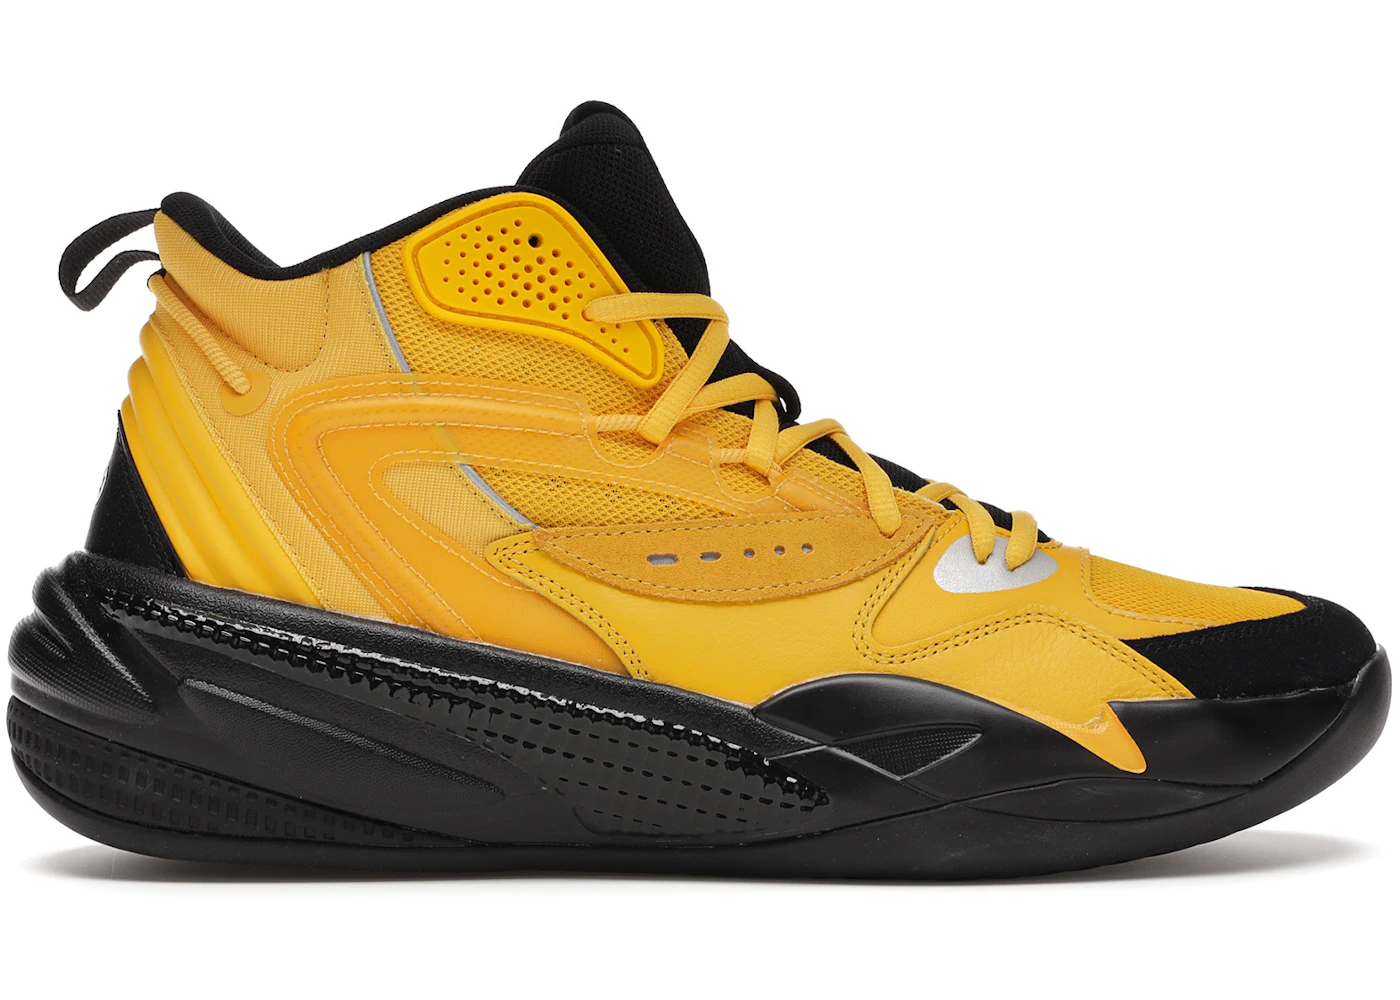 if Schedule according to Puma Dreamer 2 J Cole Yellow - 194849-02 - US